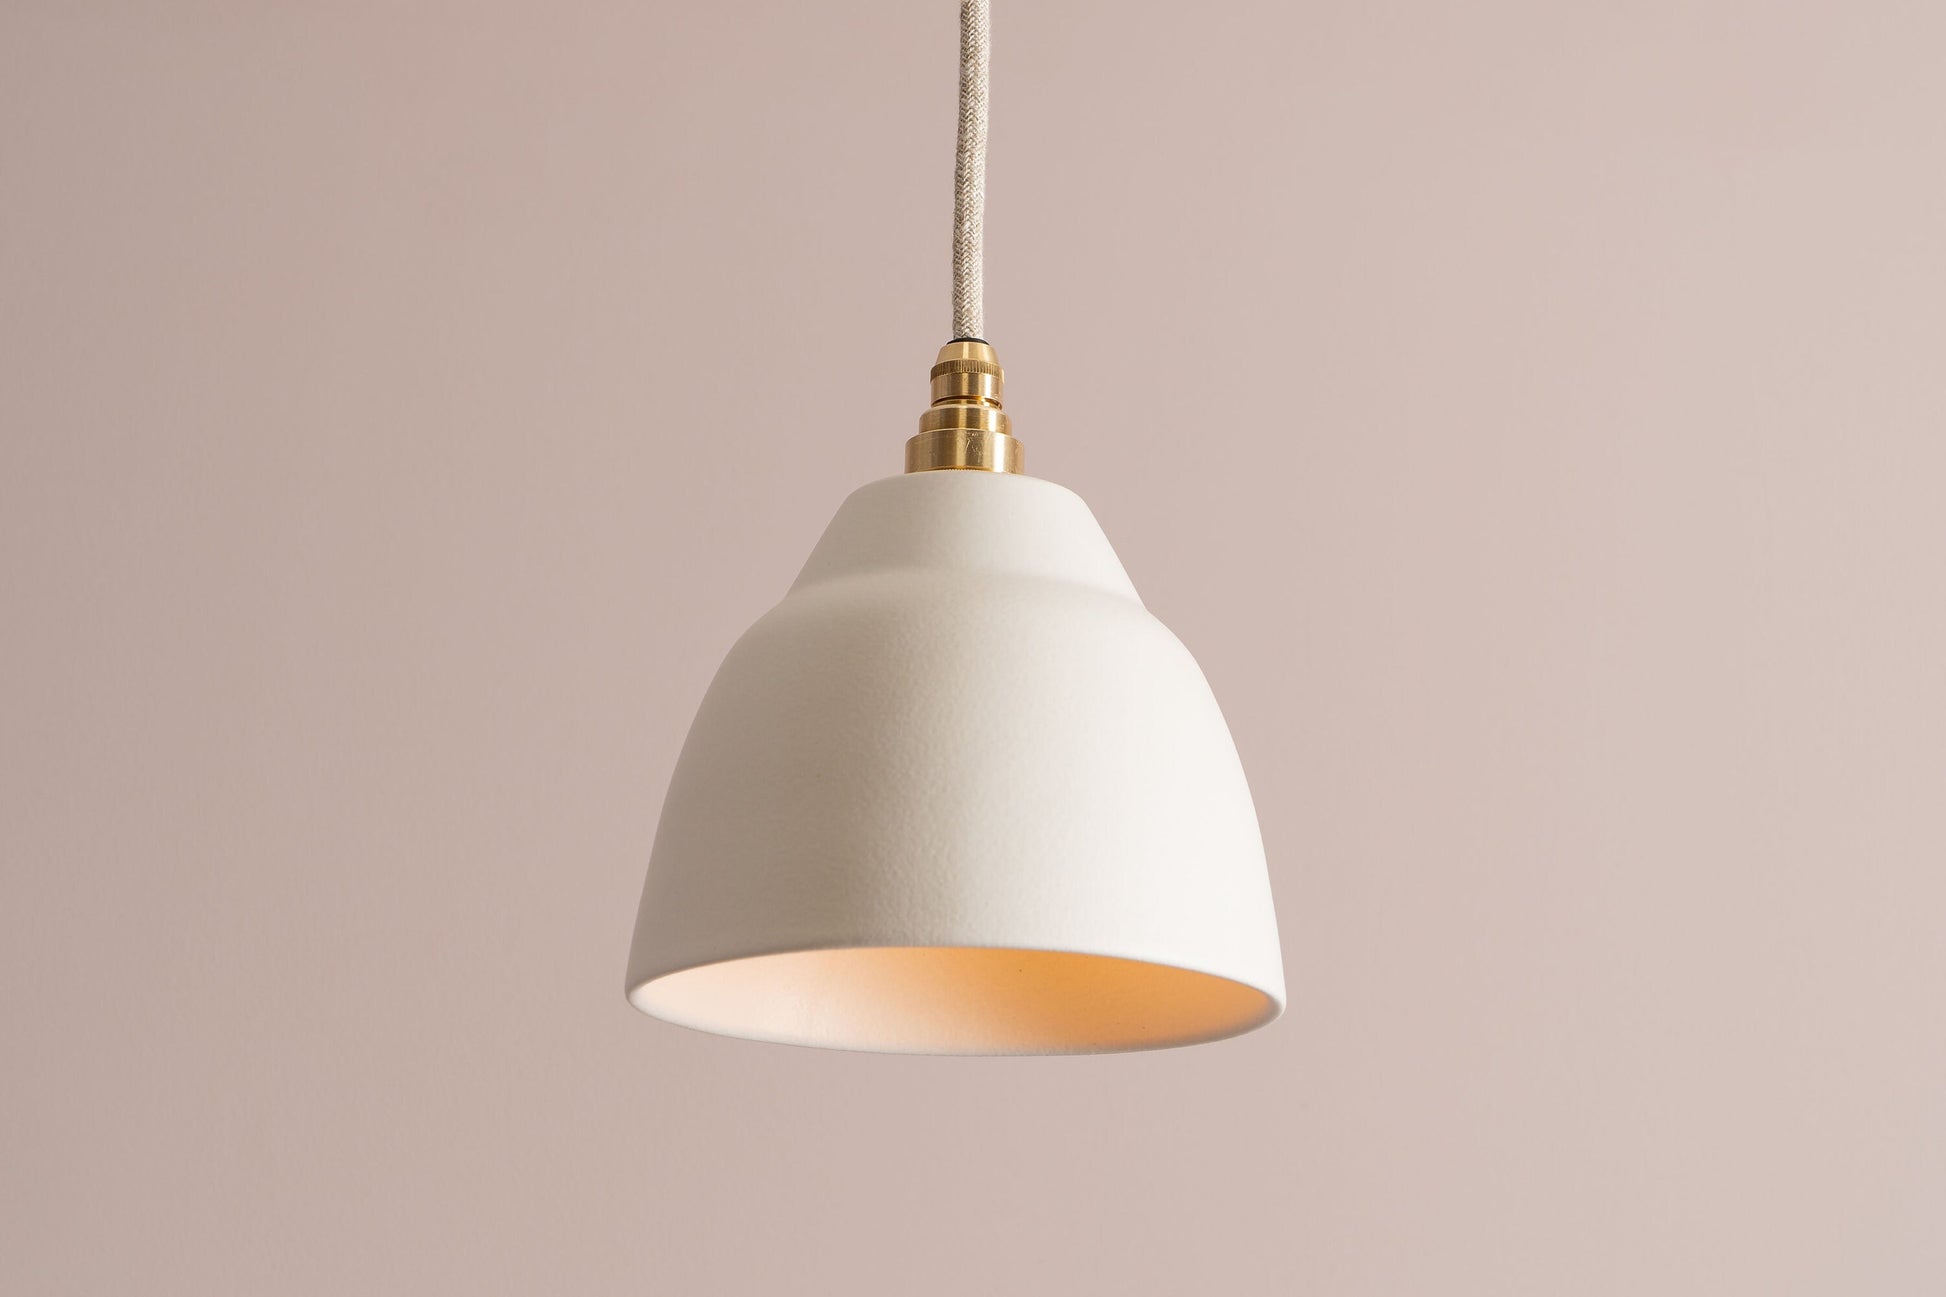 Small White Element Pendant Light in Ceramic and Brass/Nickel by StudioHaran